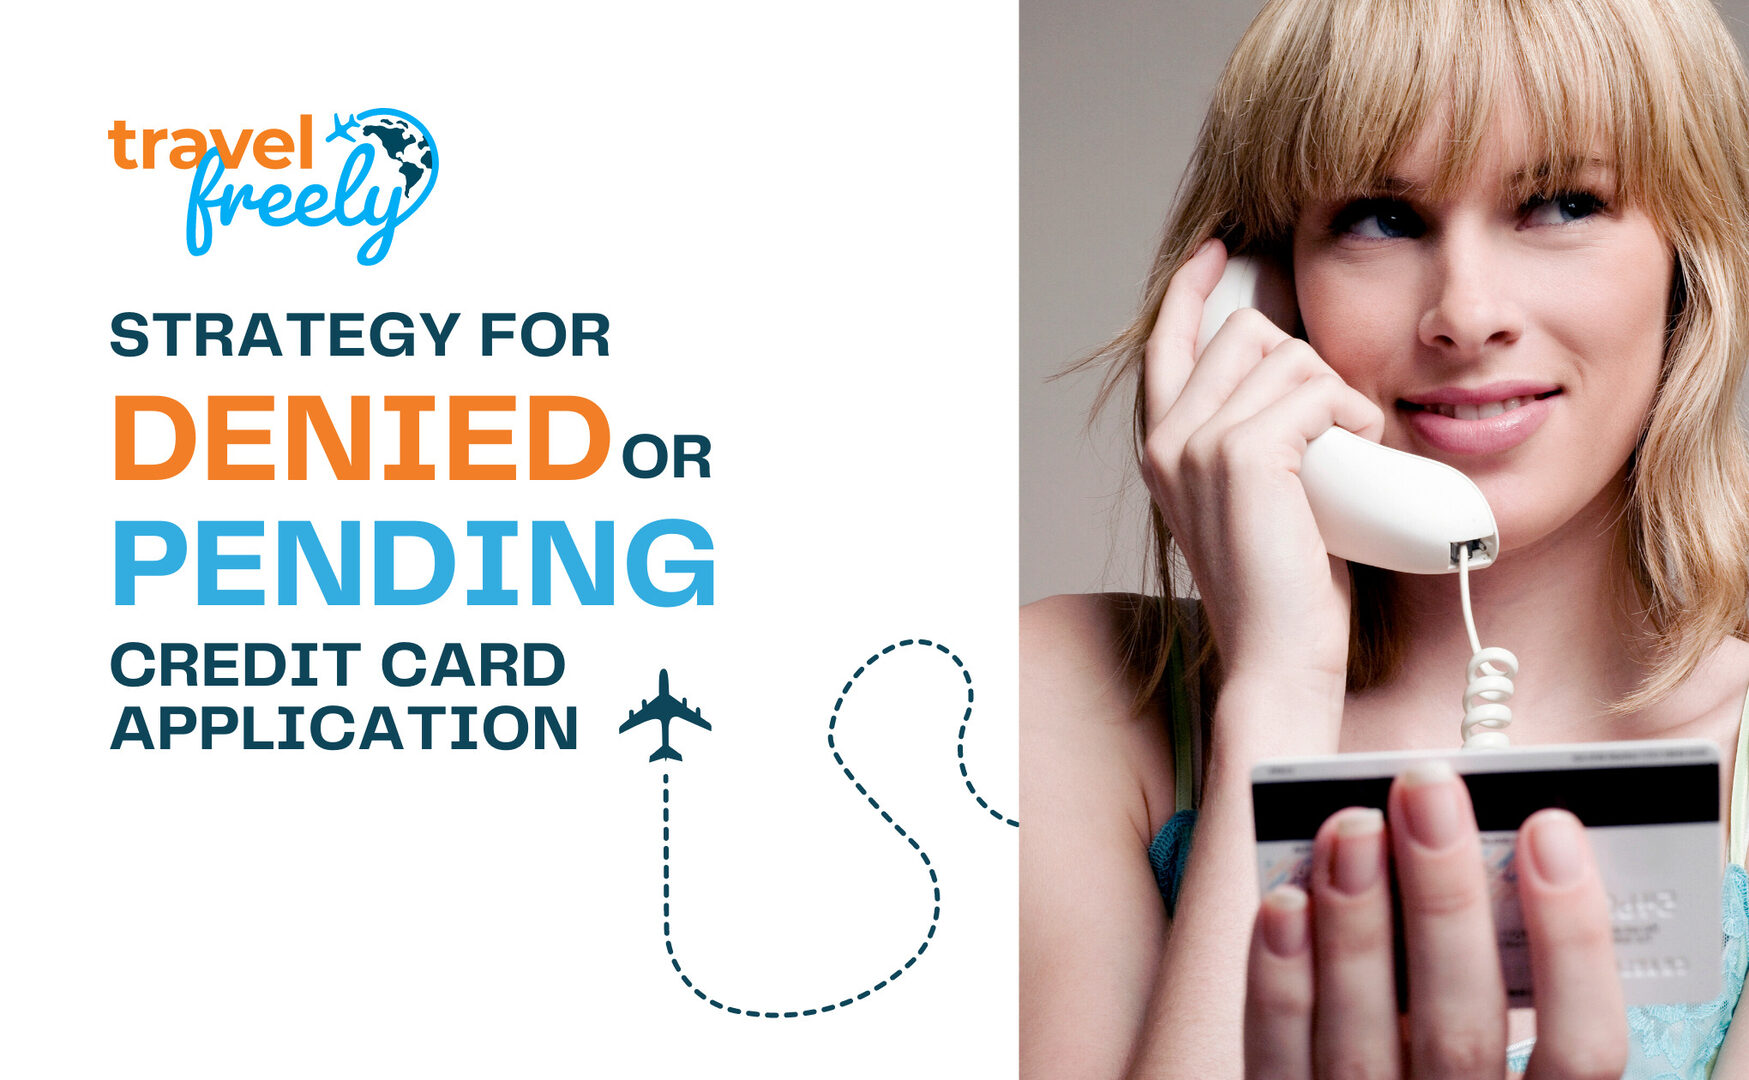 Strategy for denied or pending credit card application